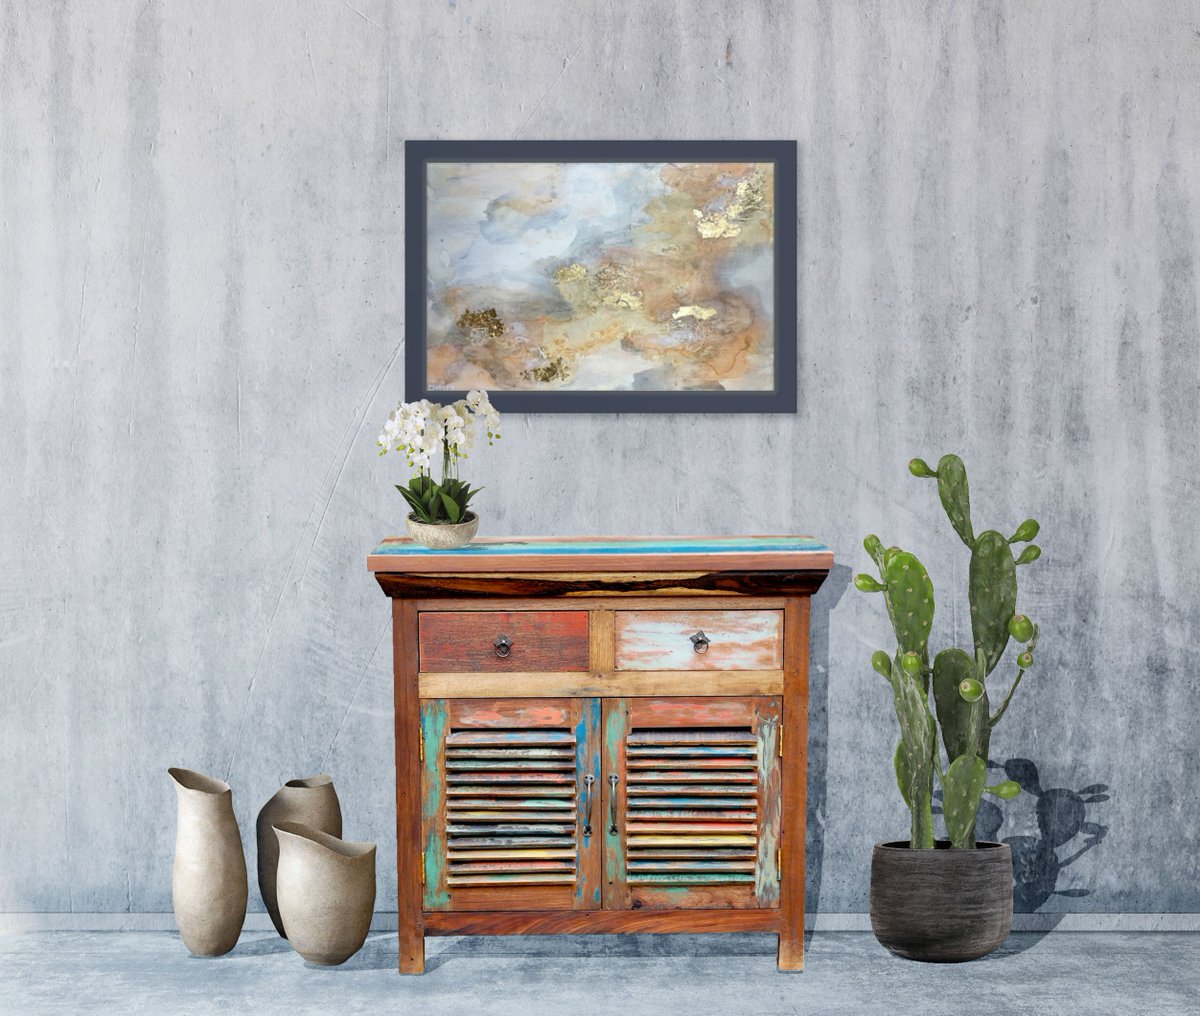 Chicteak On Twitter Our Slatted Chest Dresser Made From Recycled